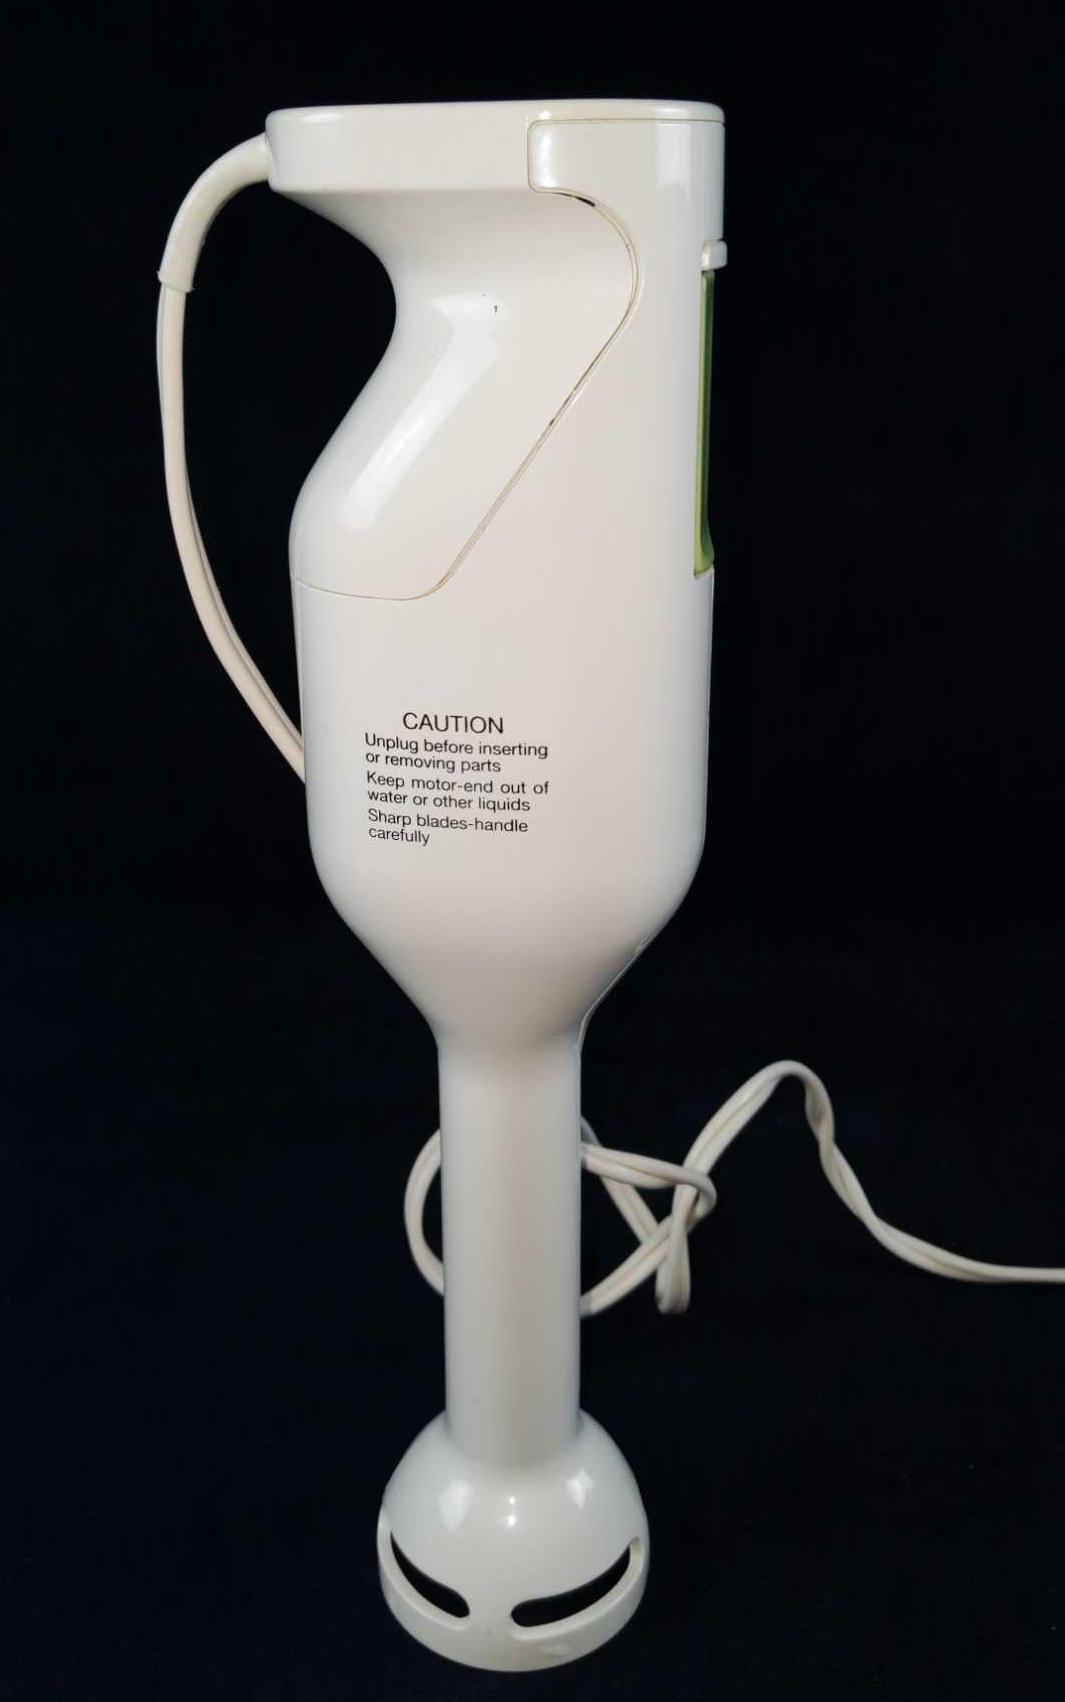 Braun MR30 Multipractic Hand Blender with Original Box & Instructions